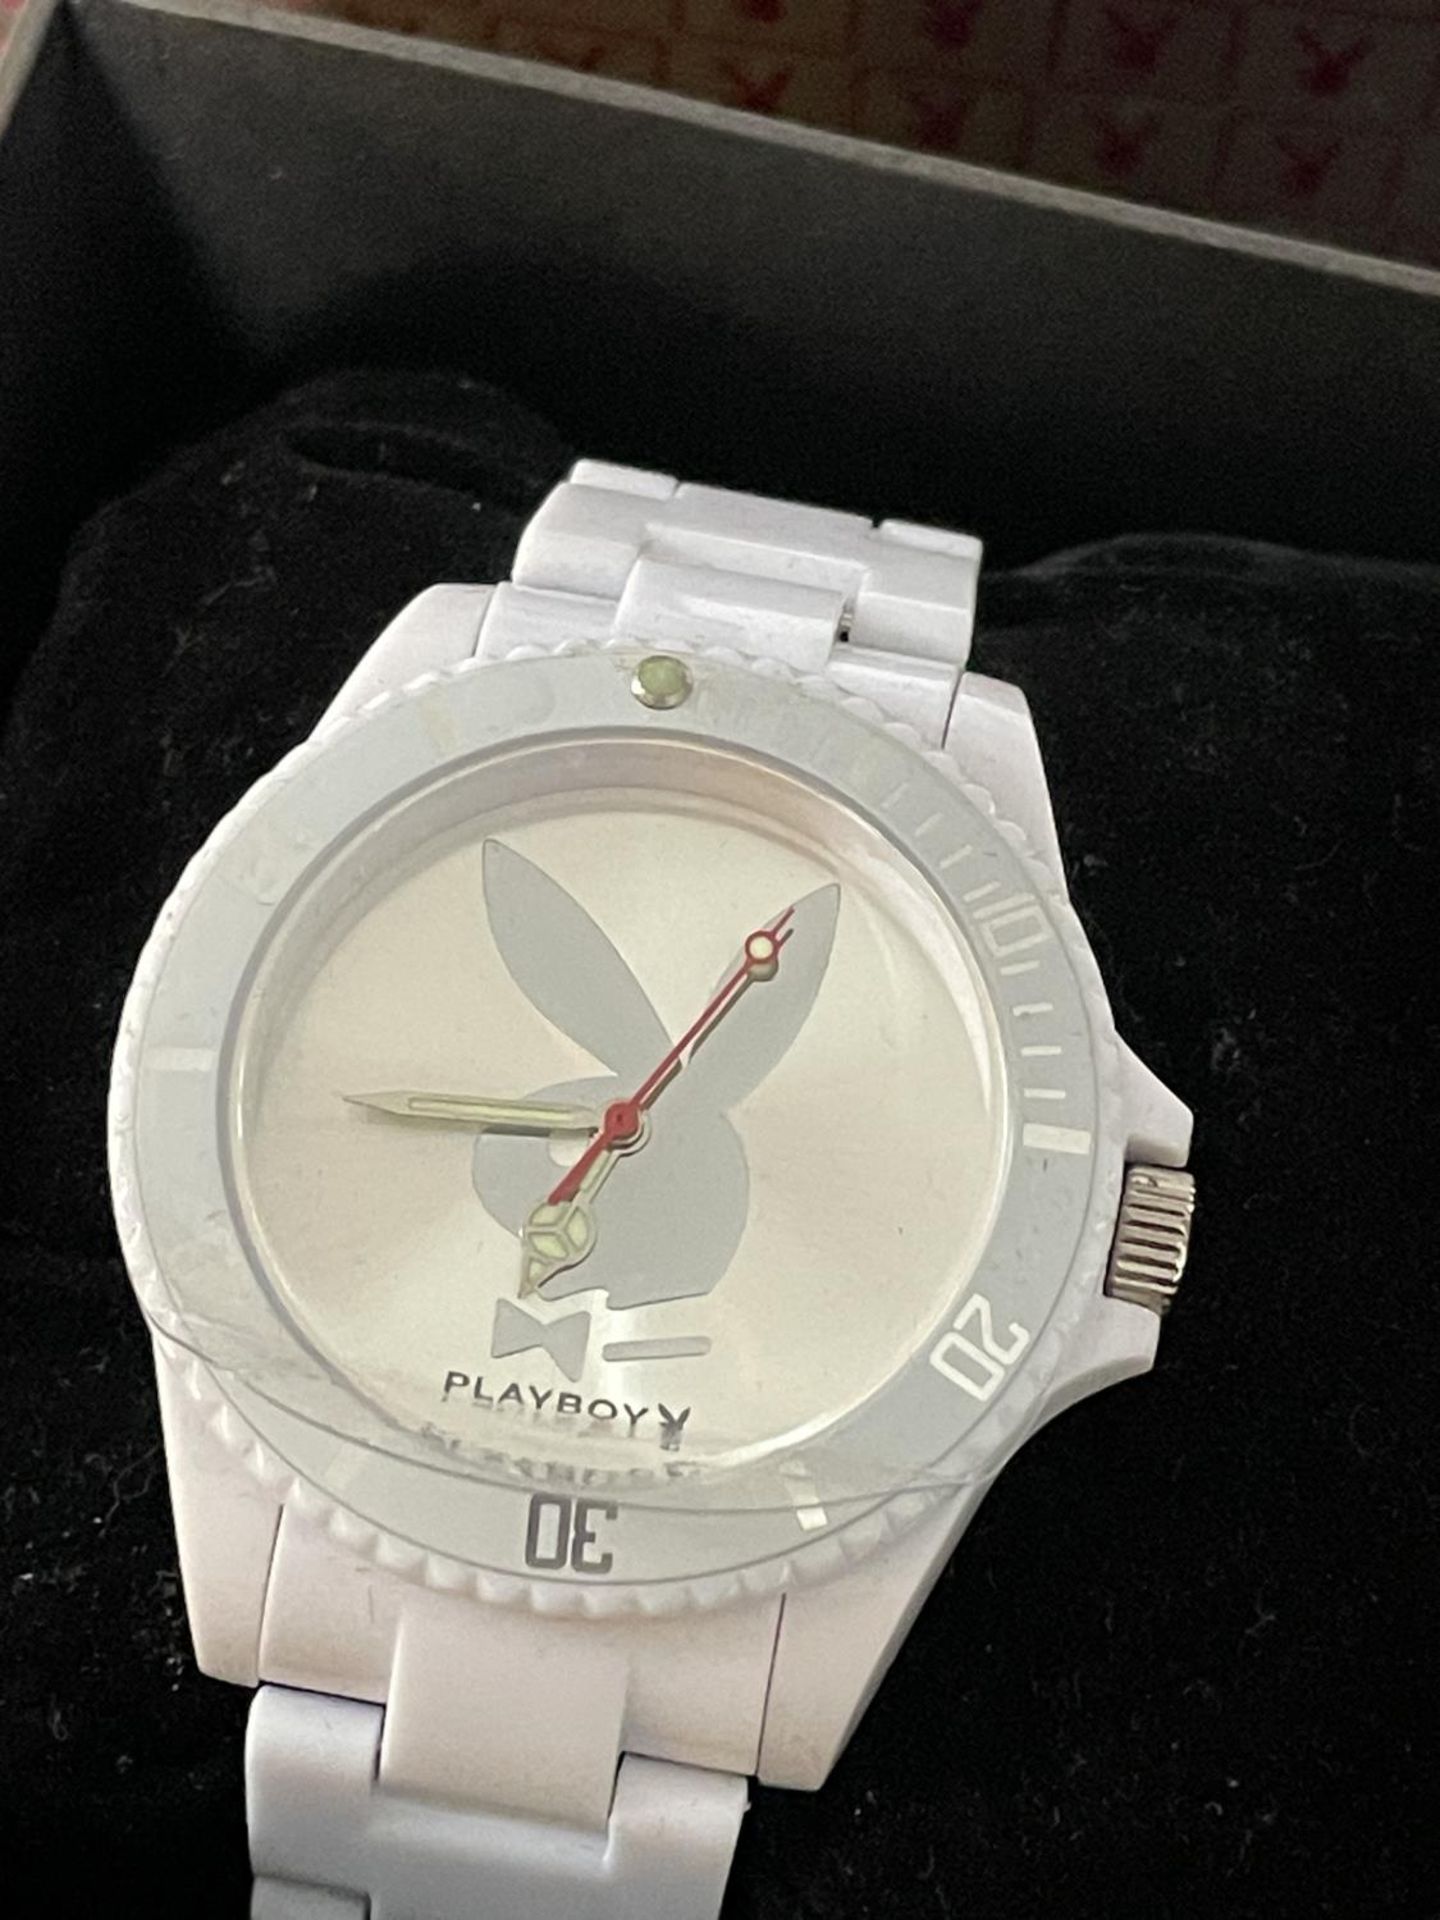 A PLAYBOY WRIST WATCH WITH WHITE STRAP IN A PRESENTATION BOX SEEN WORKING BUT NO WARRANTY - Image 2 of 3